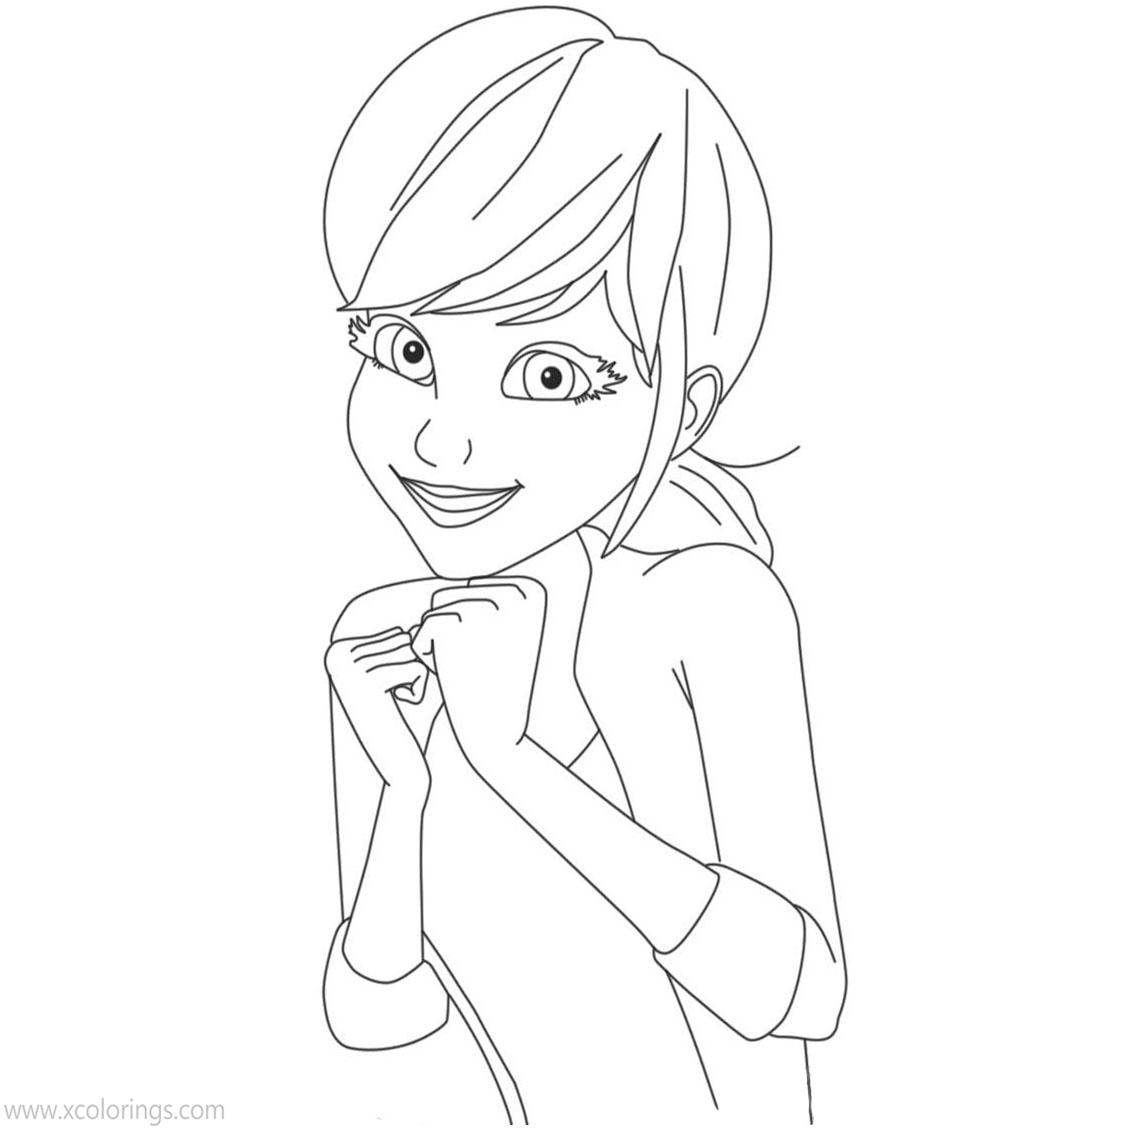 Free Lovely Miraculous Ladybug Coloring Pages printable